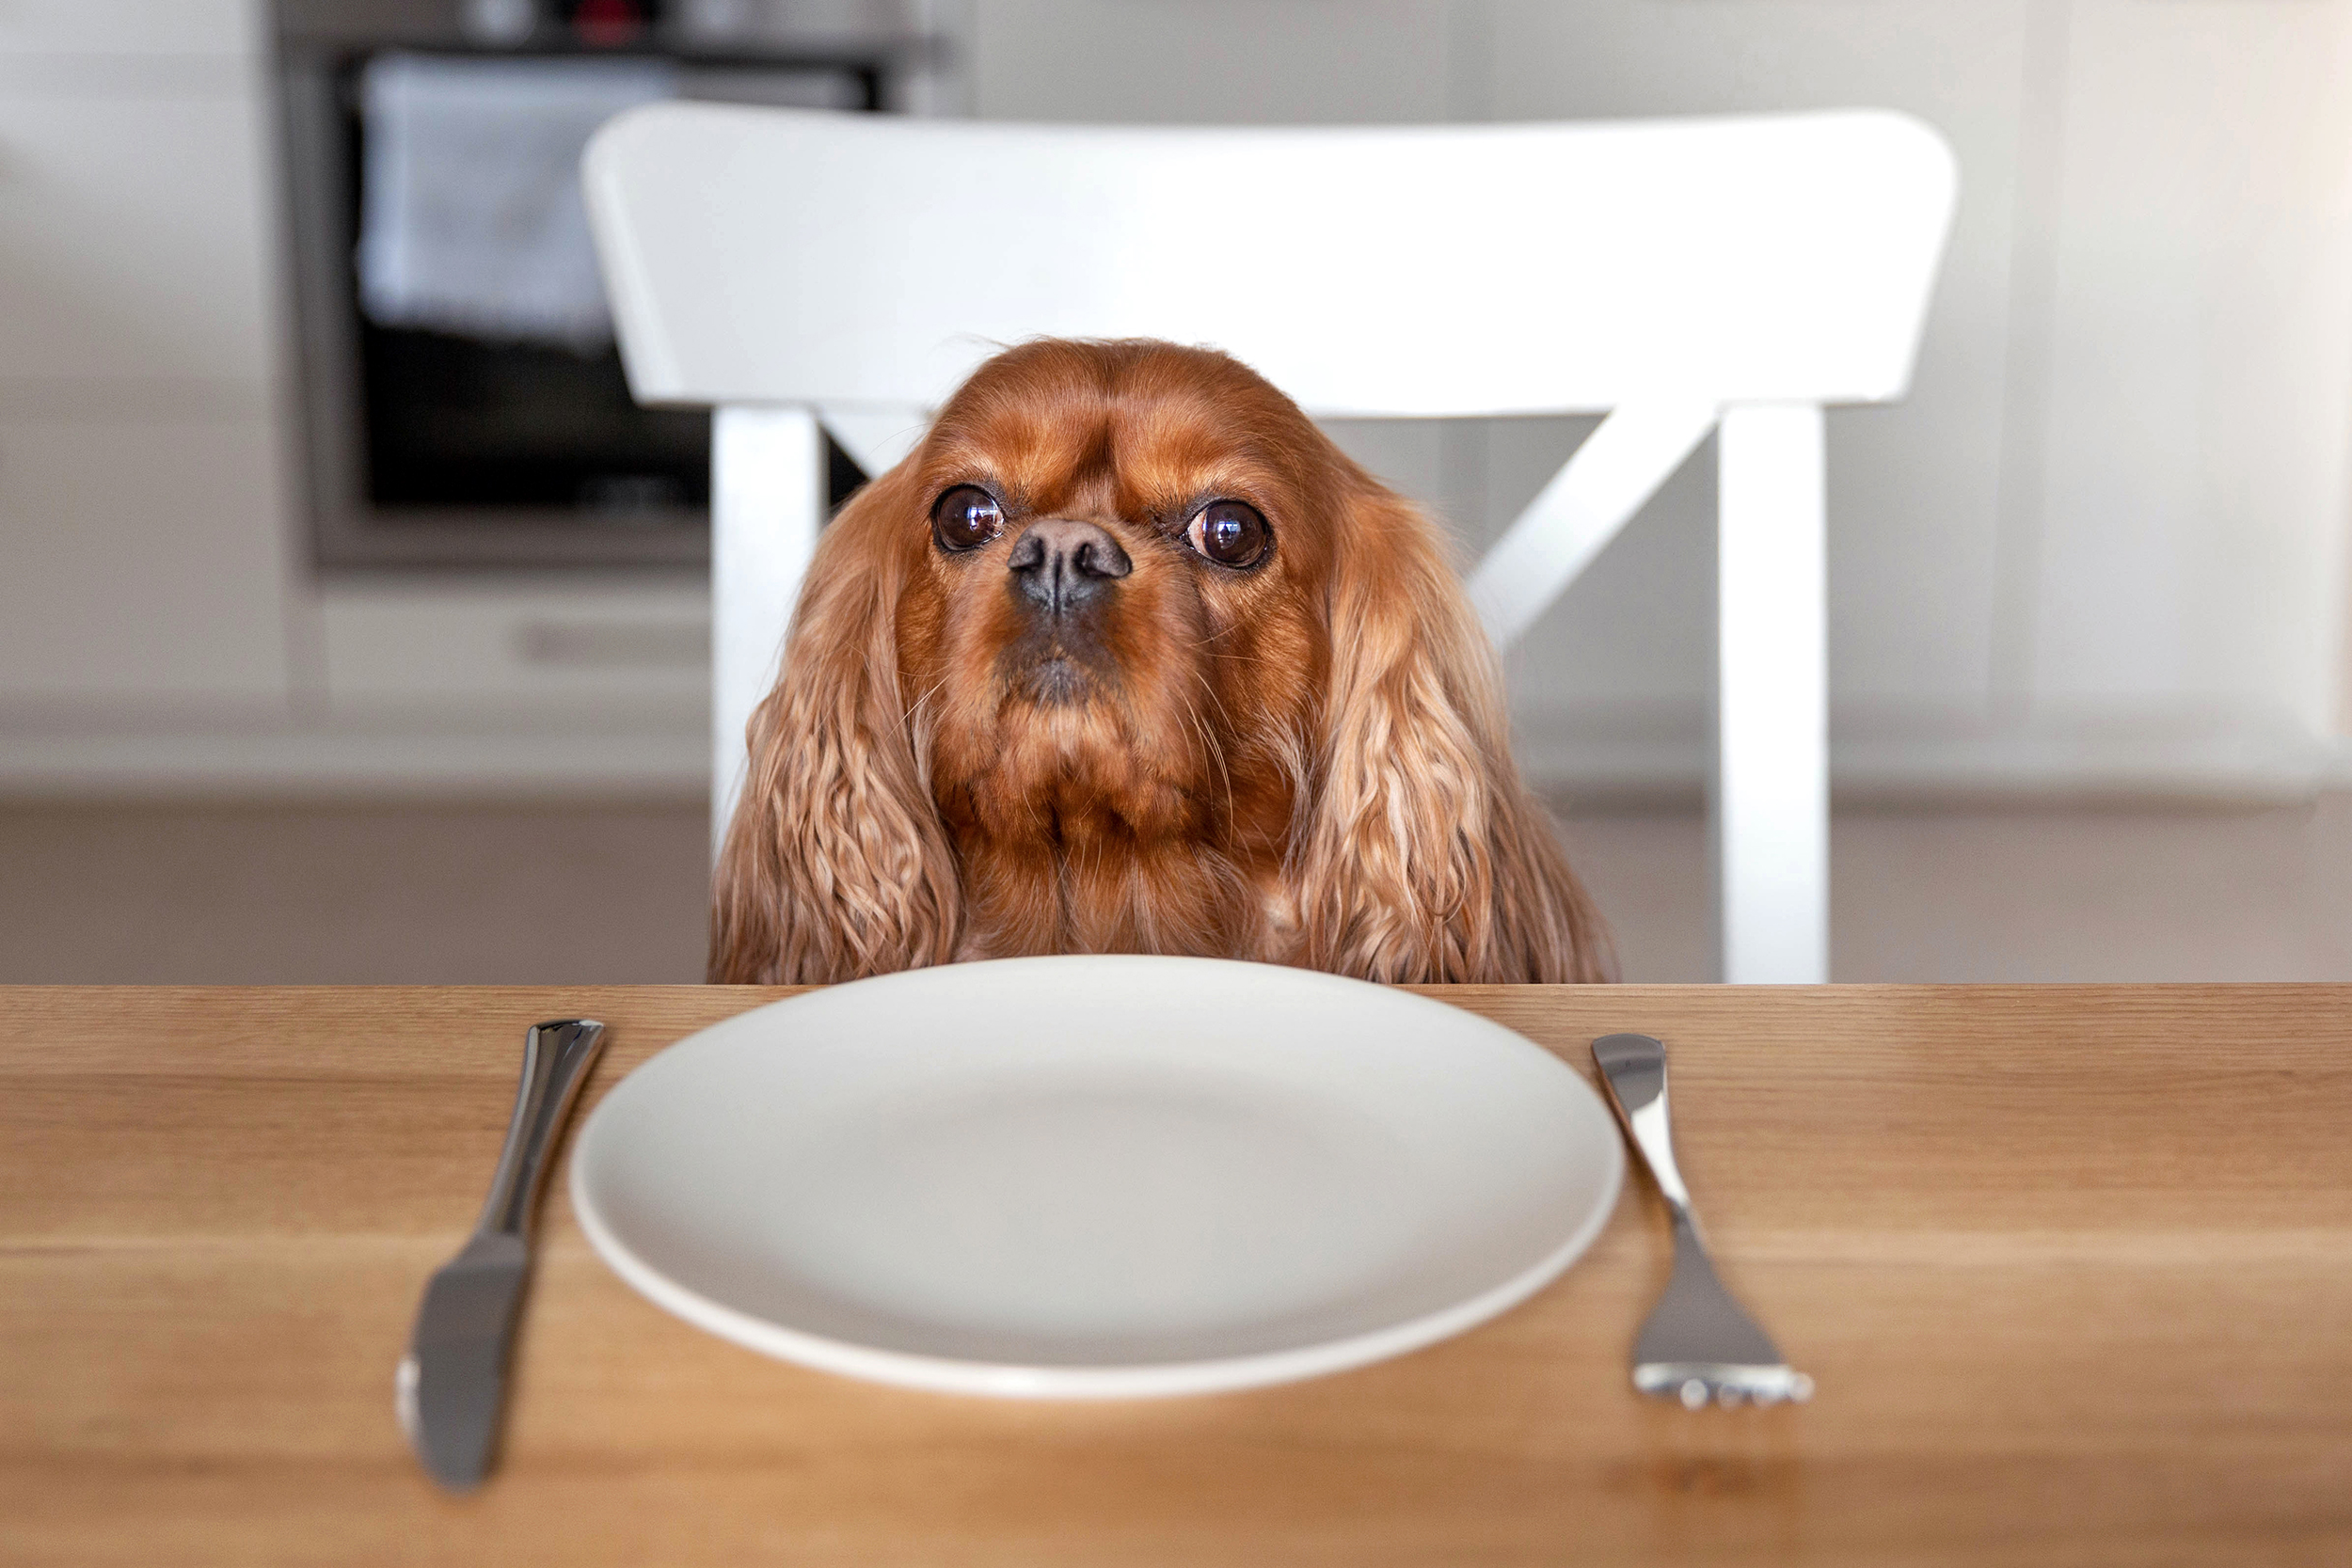 When does dog food expire?